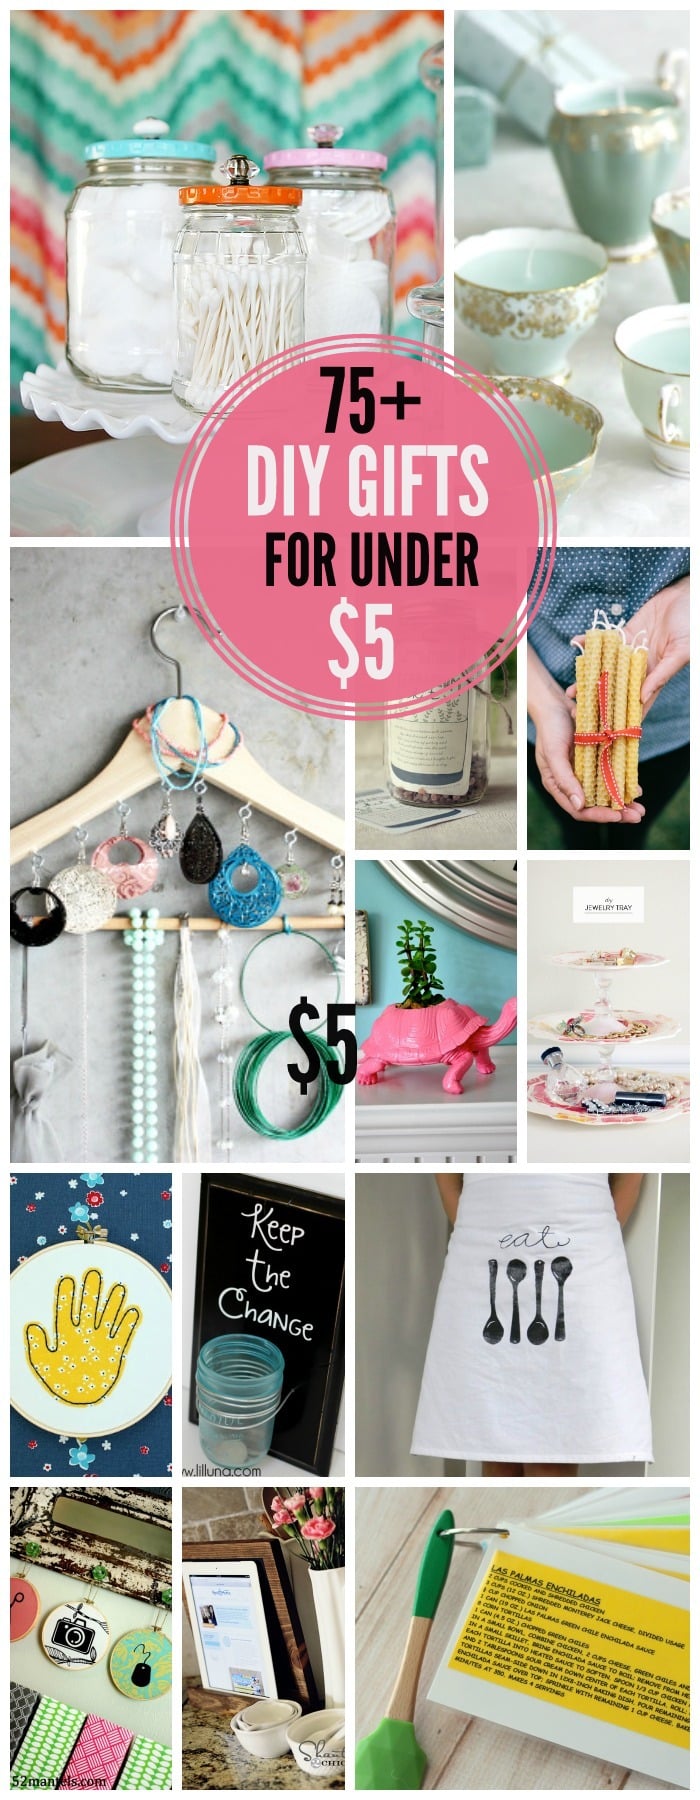 An awesome collection of 75+ DIY Gifts for Under $5. Lots of great ideas!!